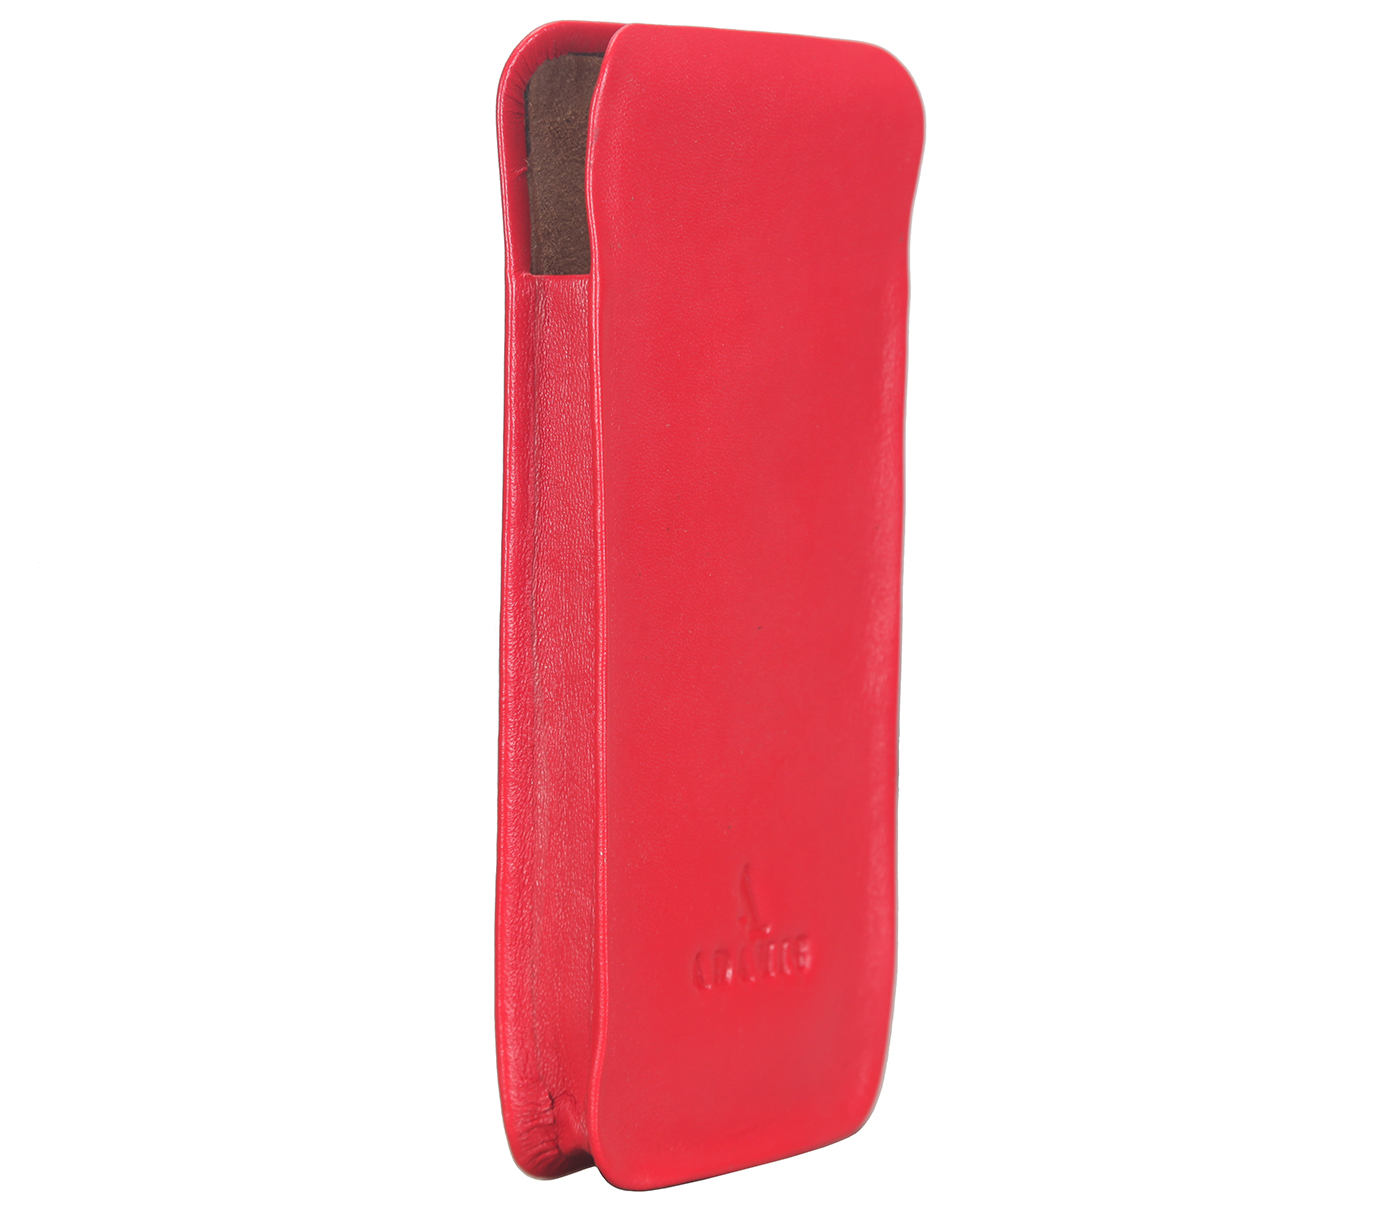 Spectacle Case--Soft stitch free spectacle case in Genuine Leather - Red